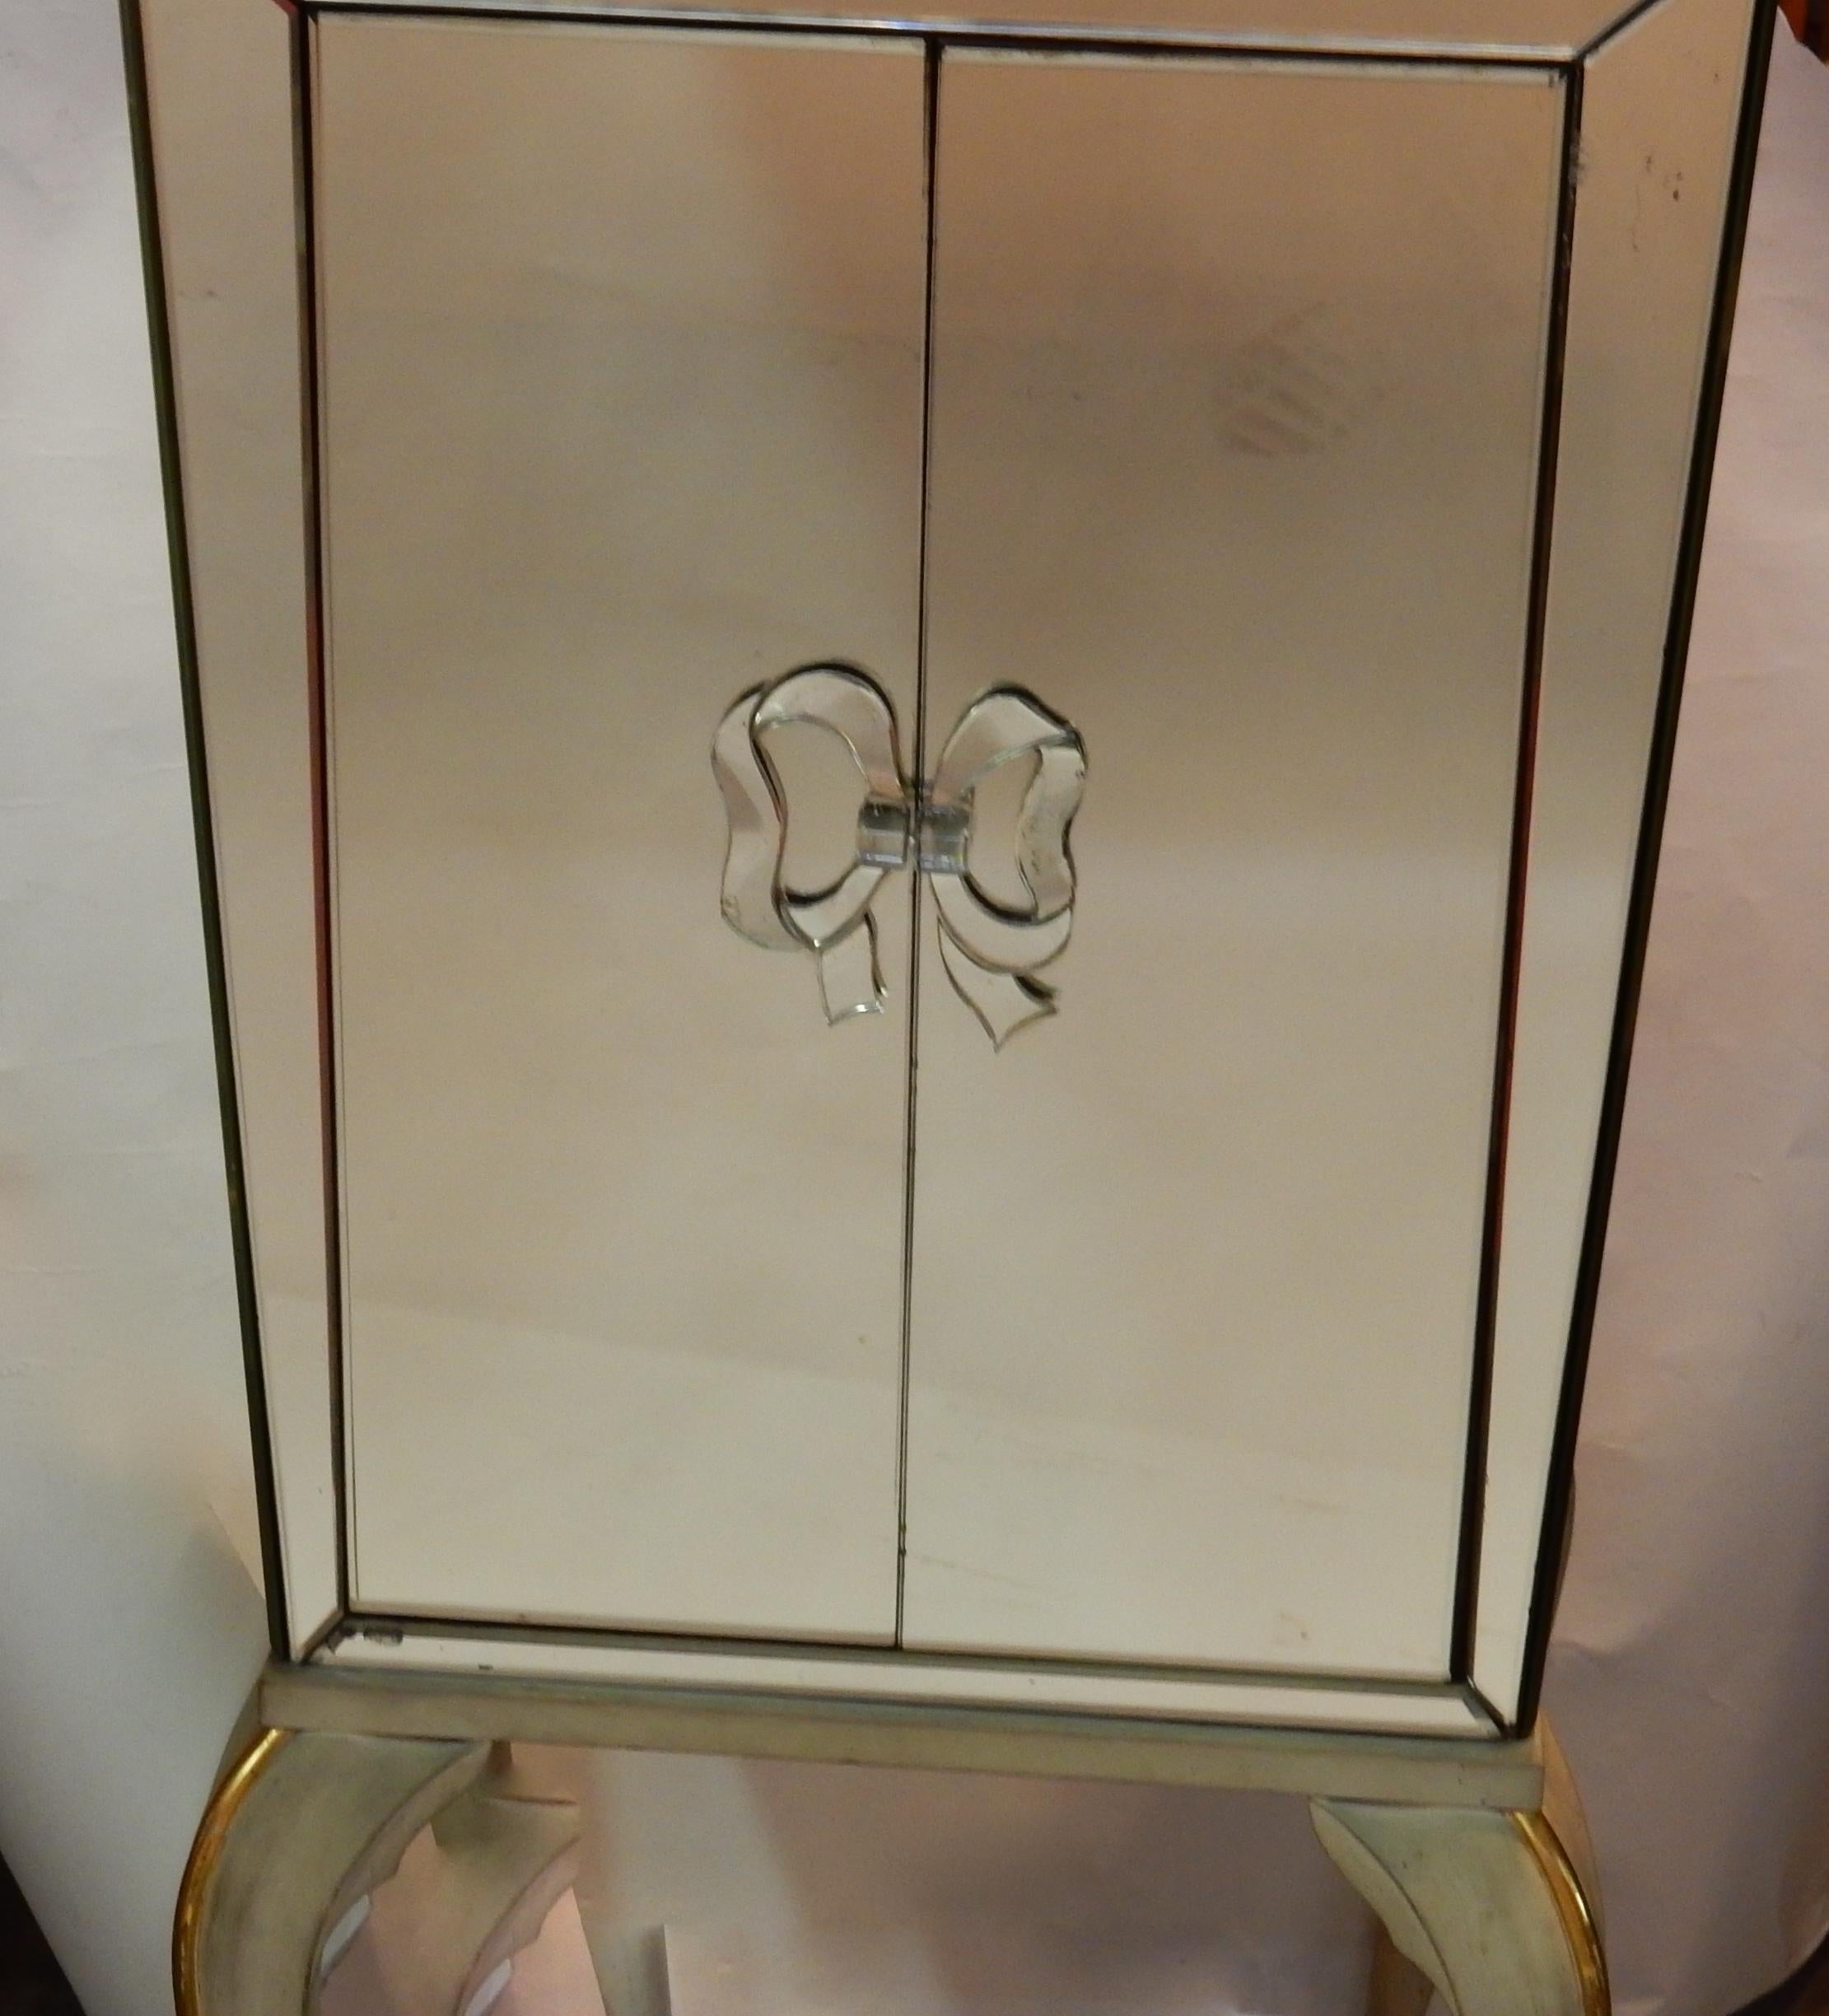 Art Deco cabinet, Maison Jansen, decorated with mirrors, 2 doors, sycamore interior, resting on legs with 4 curved legs and painted and gilded. Good condition,
Measures: Base 55 x 45 x H 45 cm
Cabinet 55 x 39 x H 71 cm.